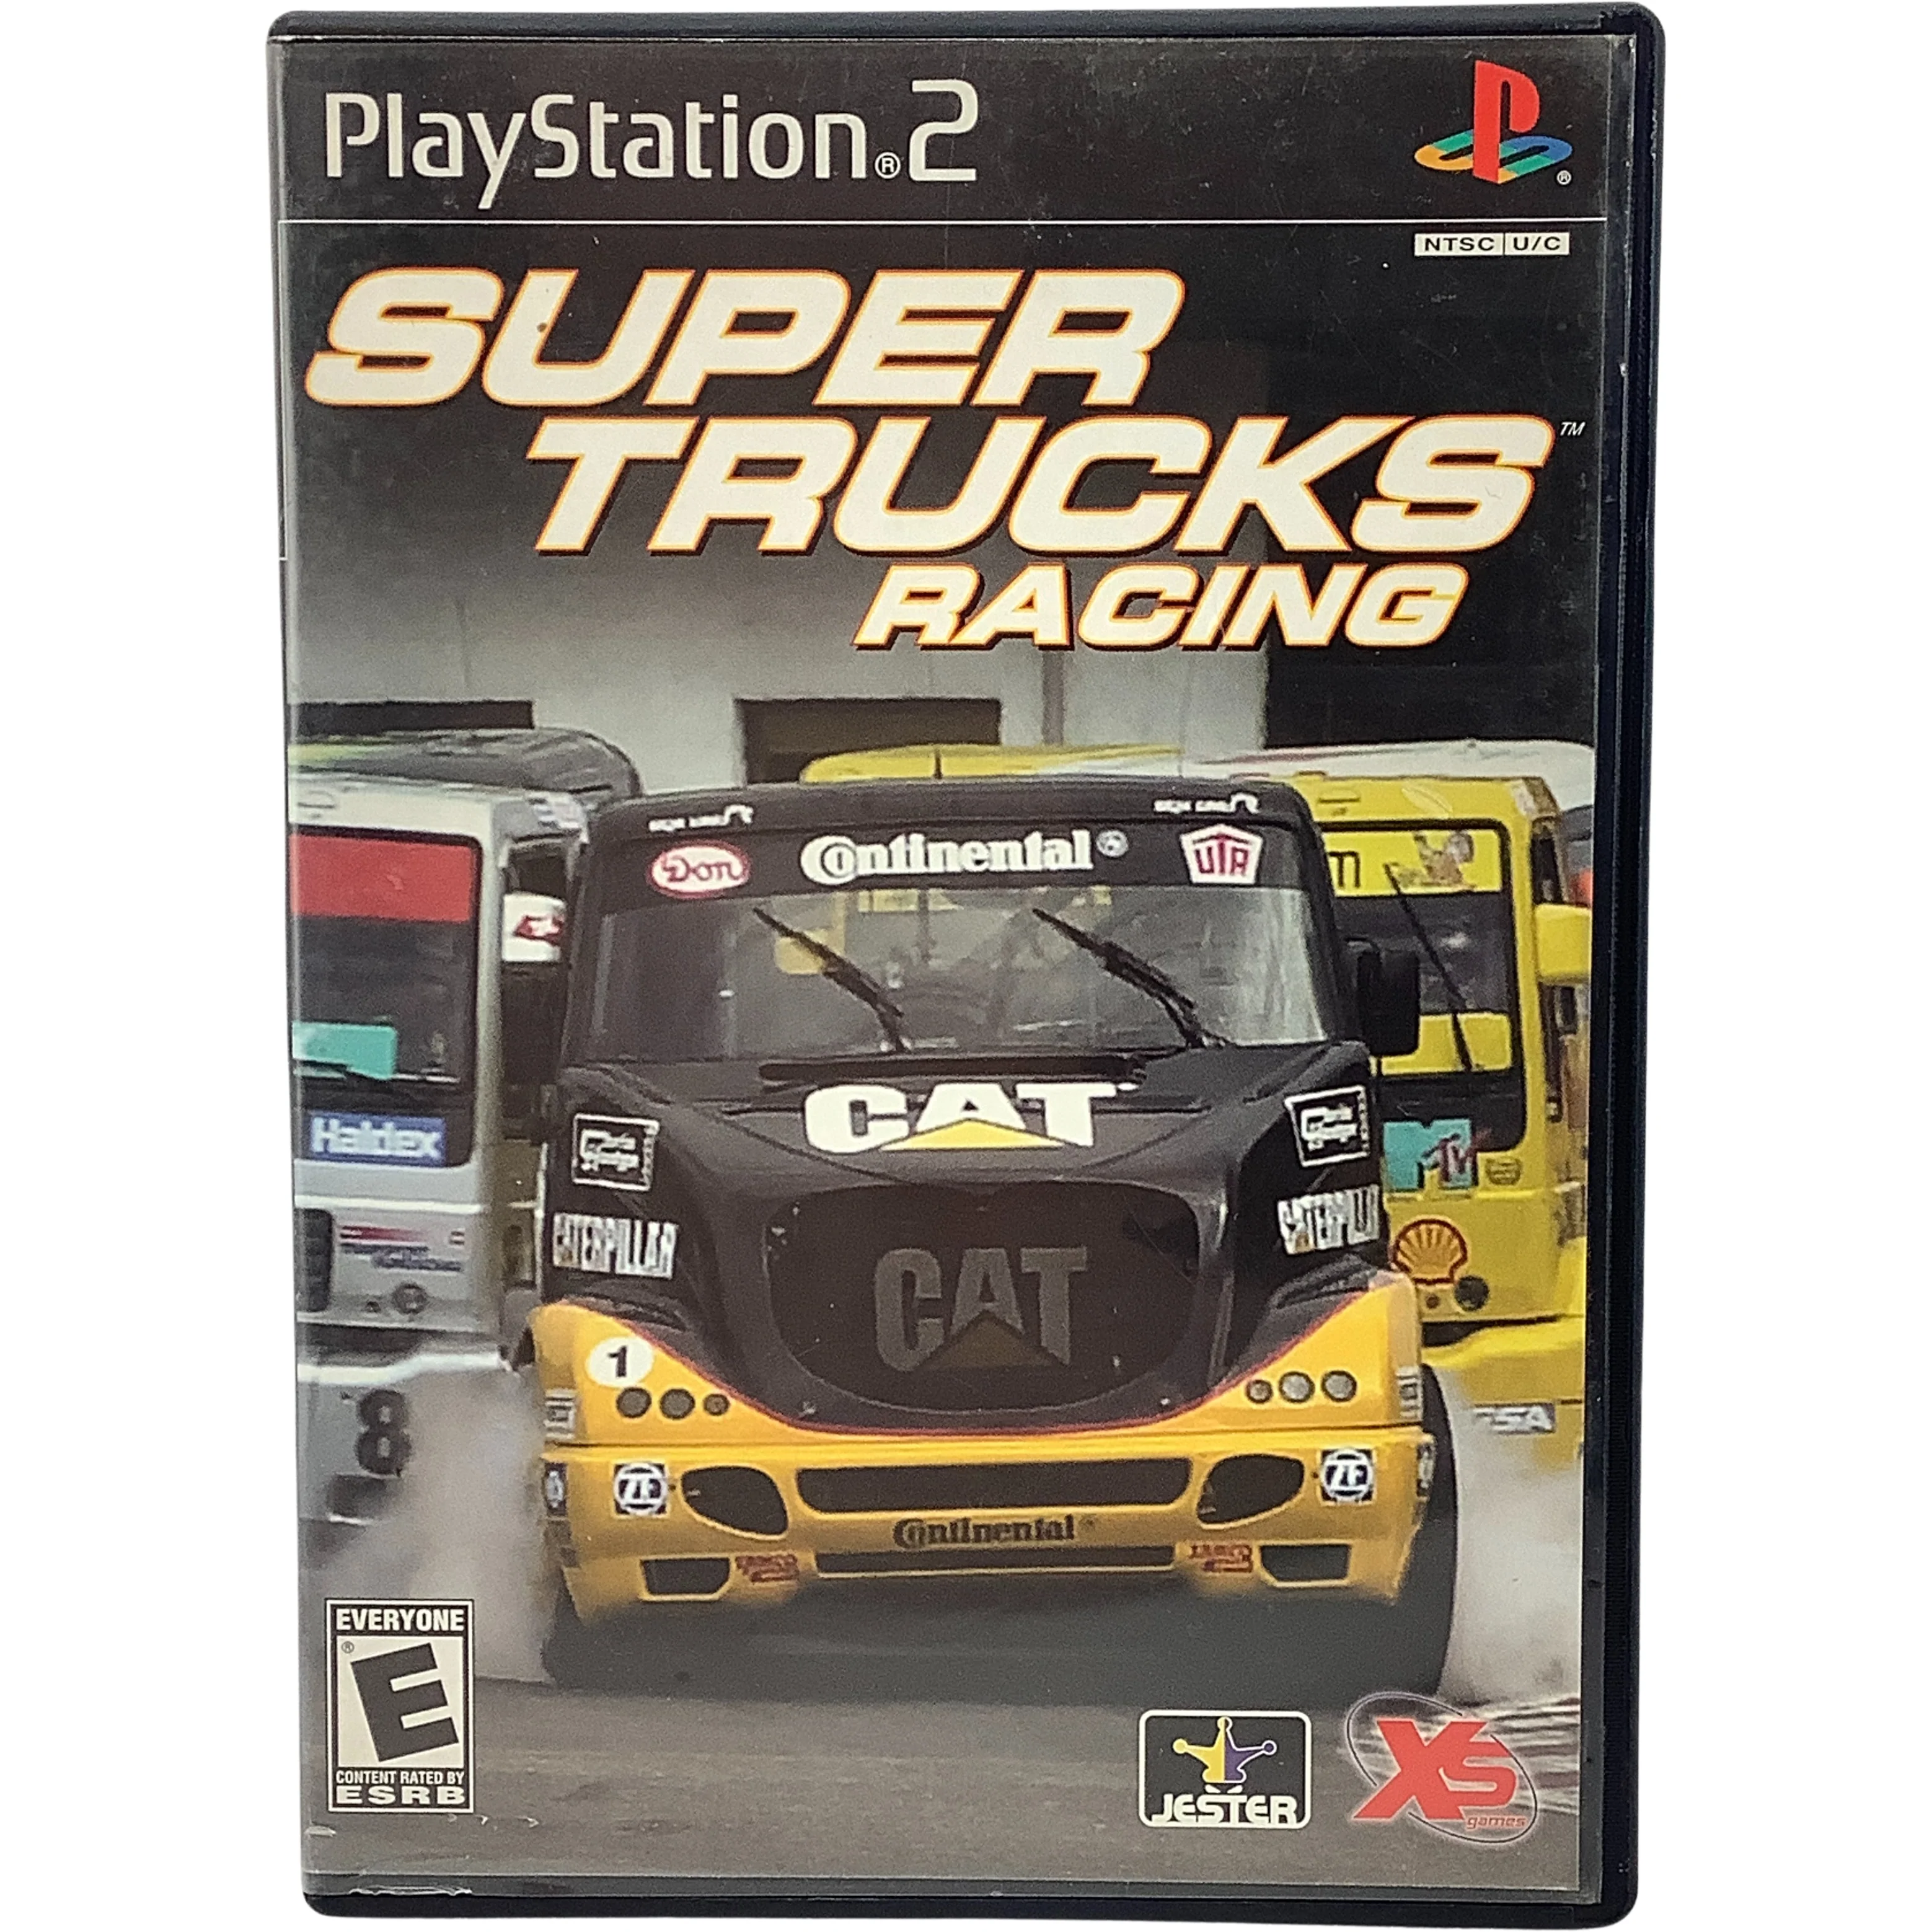 PlayStation 2 "Super Trucks Racing" Game / Video Game **OPENED**